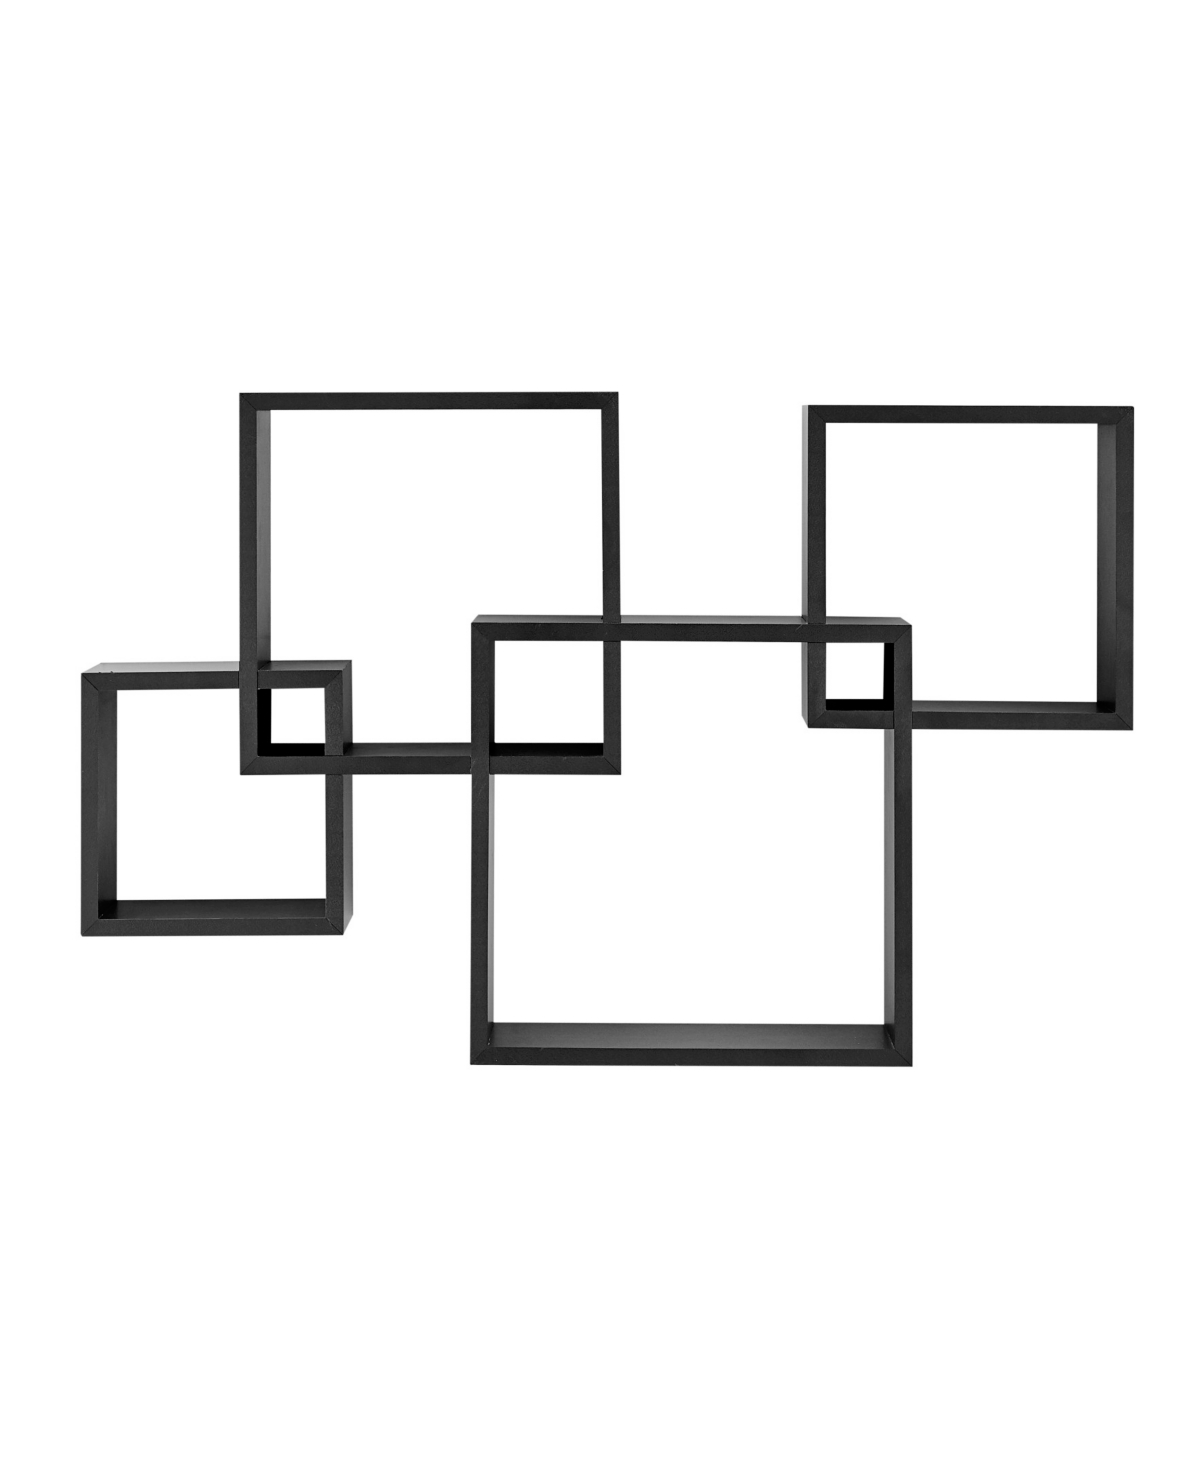 Blocchetto Intersecting Cubes Wall Shelf Unit, Horizontal or Vertical - Black